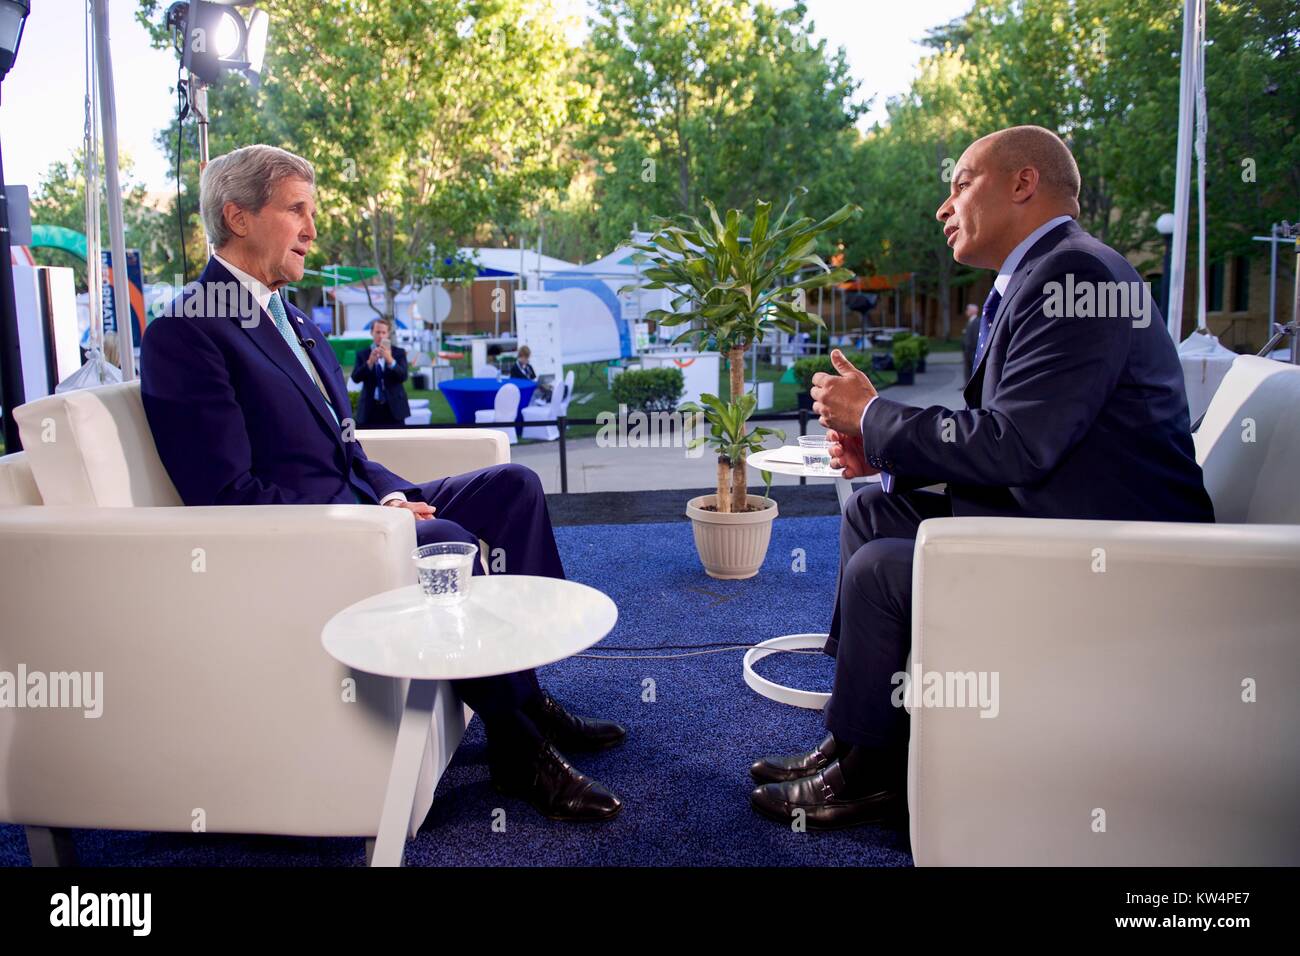 US Secretary of State John Kerry sits down with Al Jazeera Washington Bureau Chief Abderrahim Foukara for an interview after the Secretary arrived on the campus of Stanford University in Palo Alto, California, so he can attend events around the Global Entrepreneurial Summit, June 22, 2016. Image courtesy US Department of State. Stock Photo